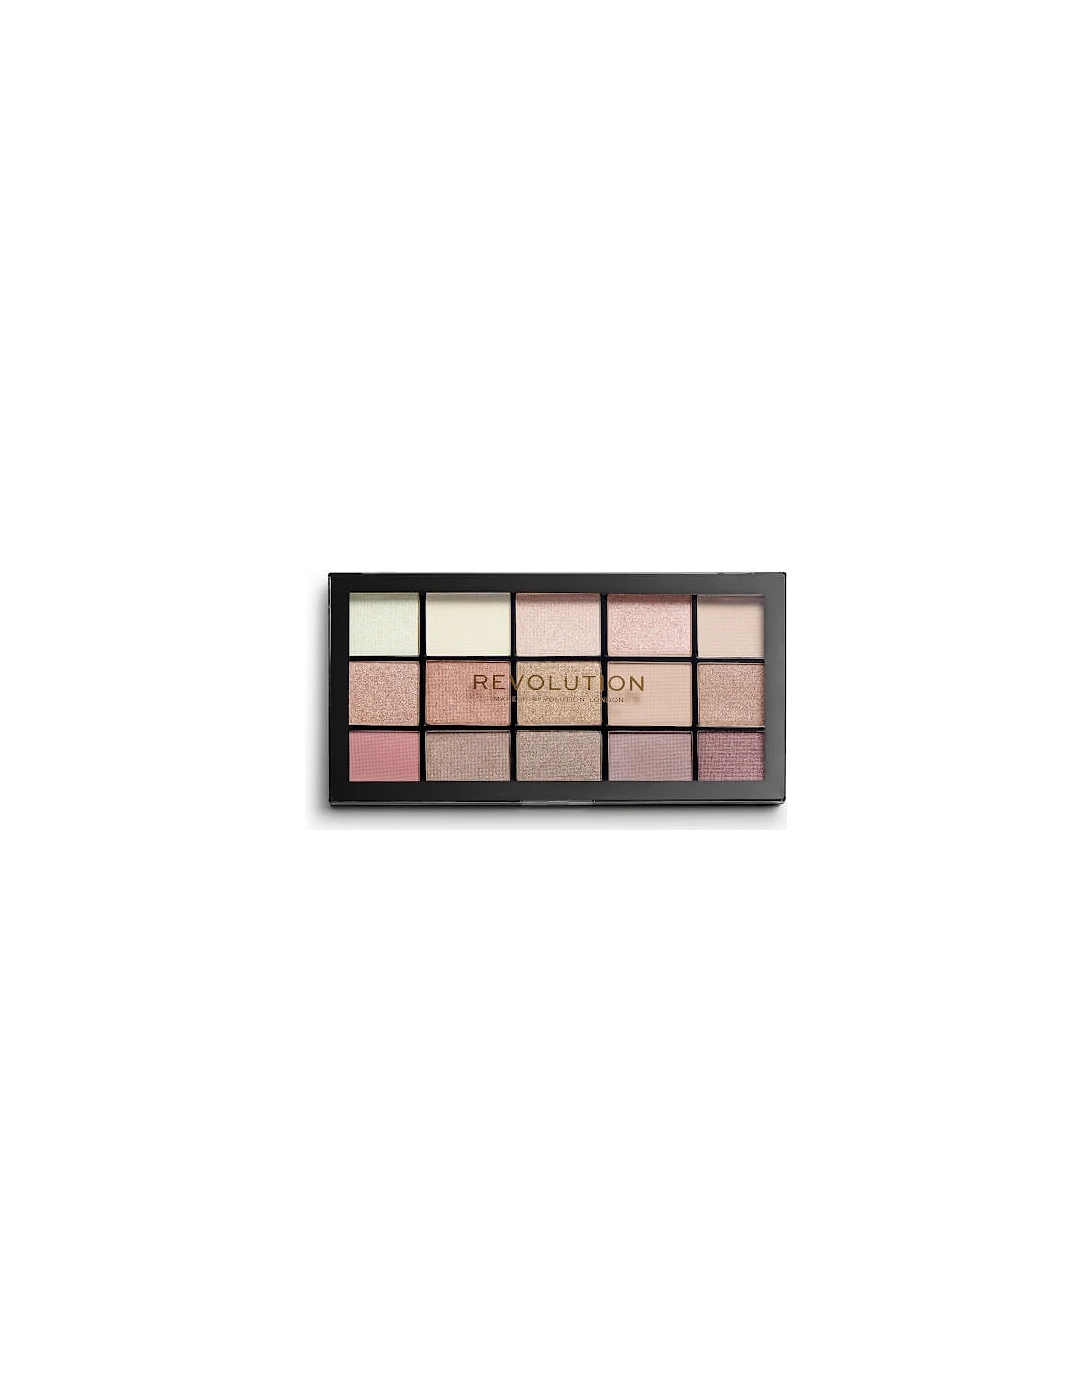 Makeup Reloaded Palette Iconic 3.0, 2 of 1